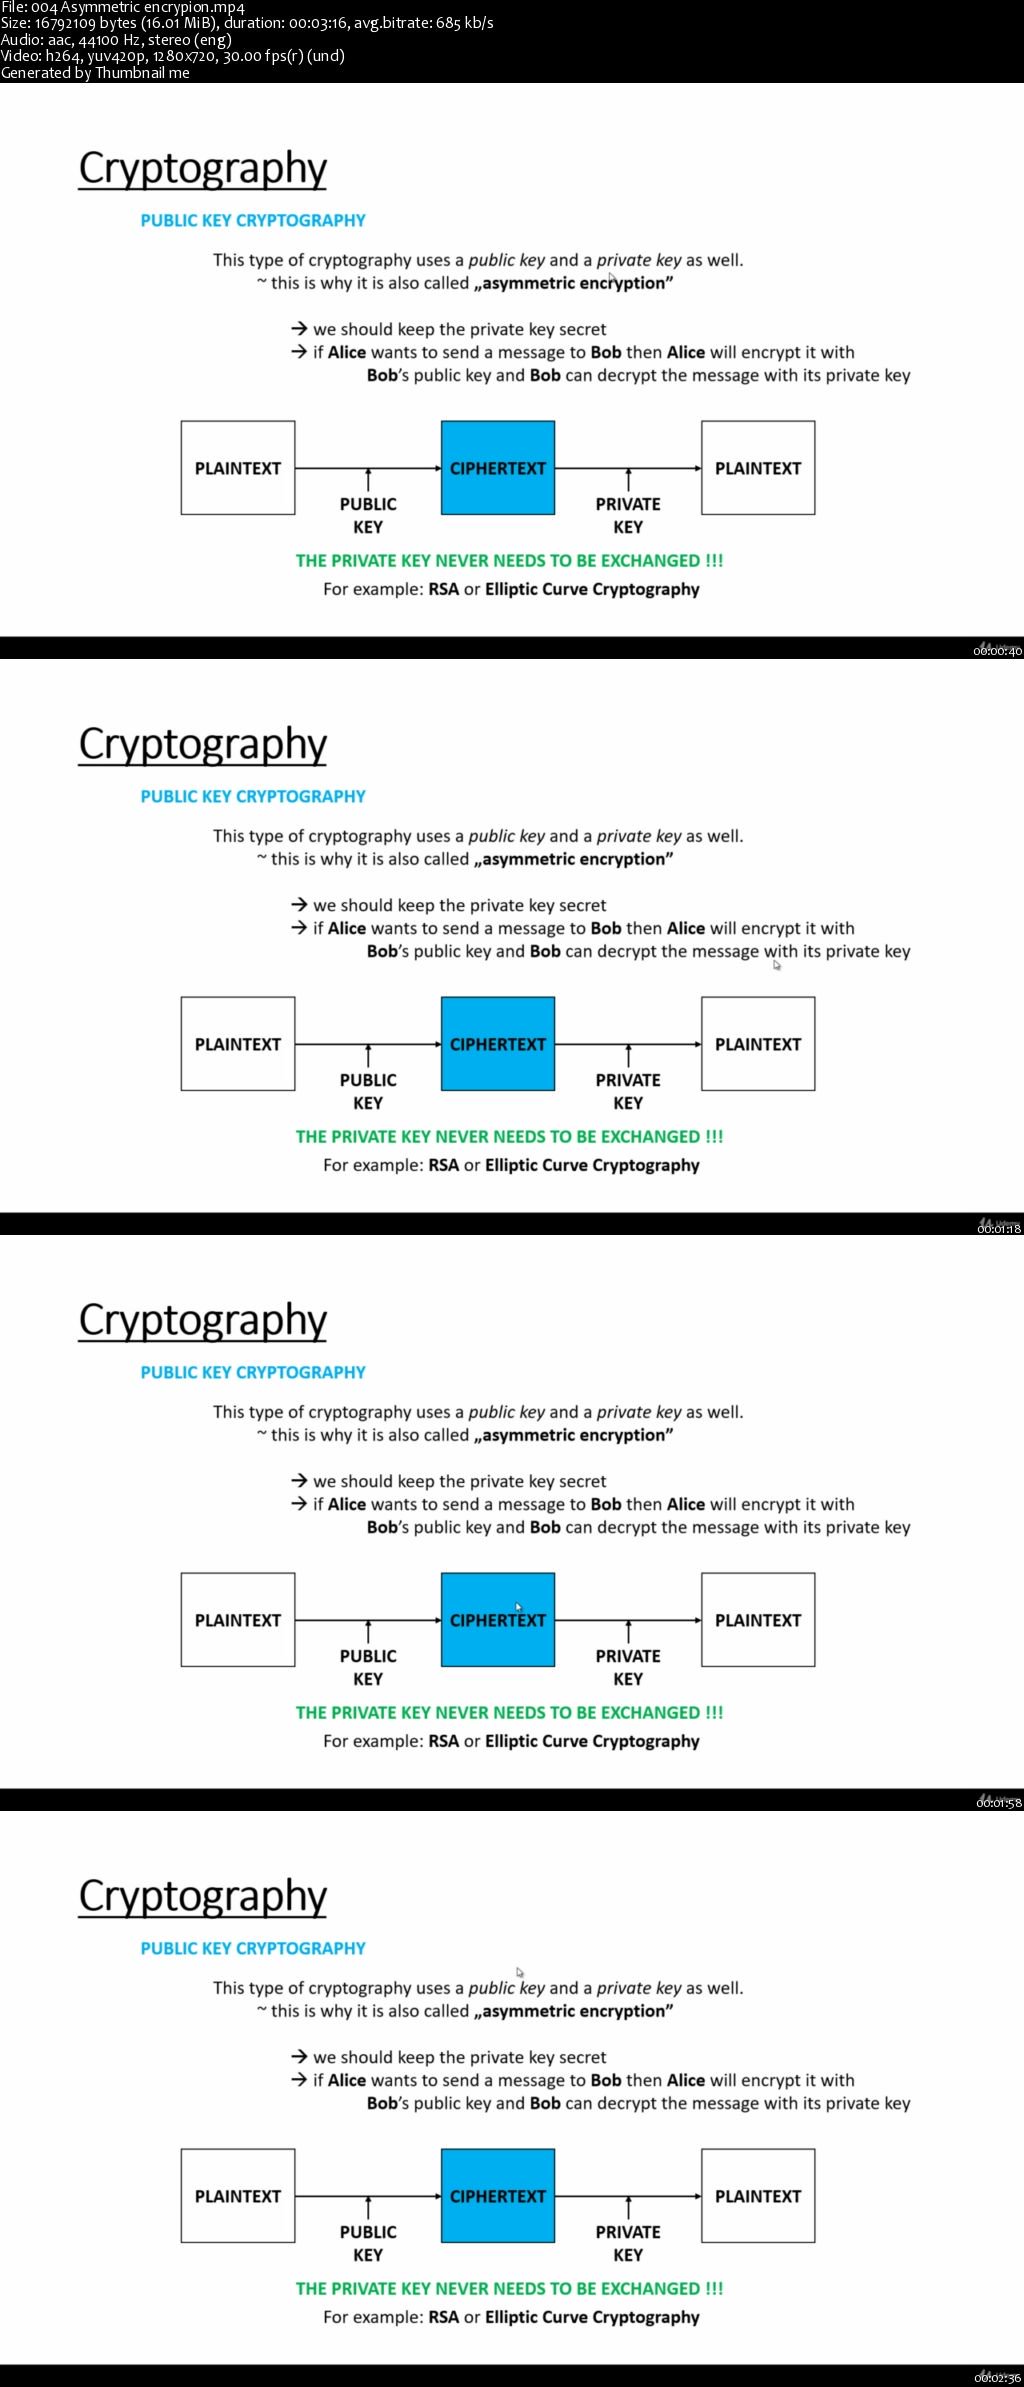 Learn Cryptography Basics in Python and Java